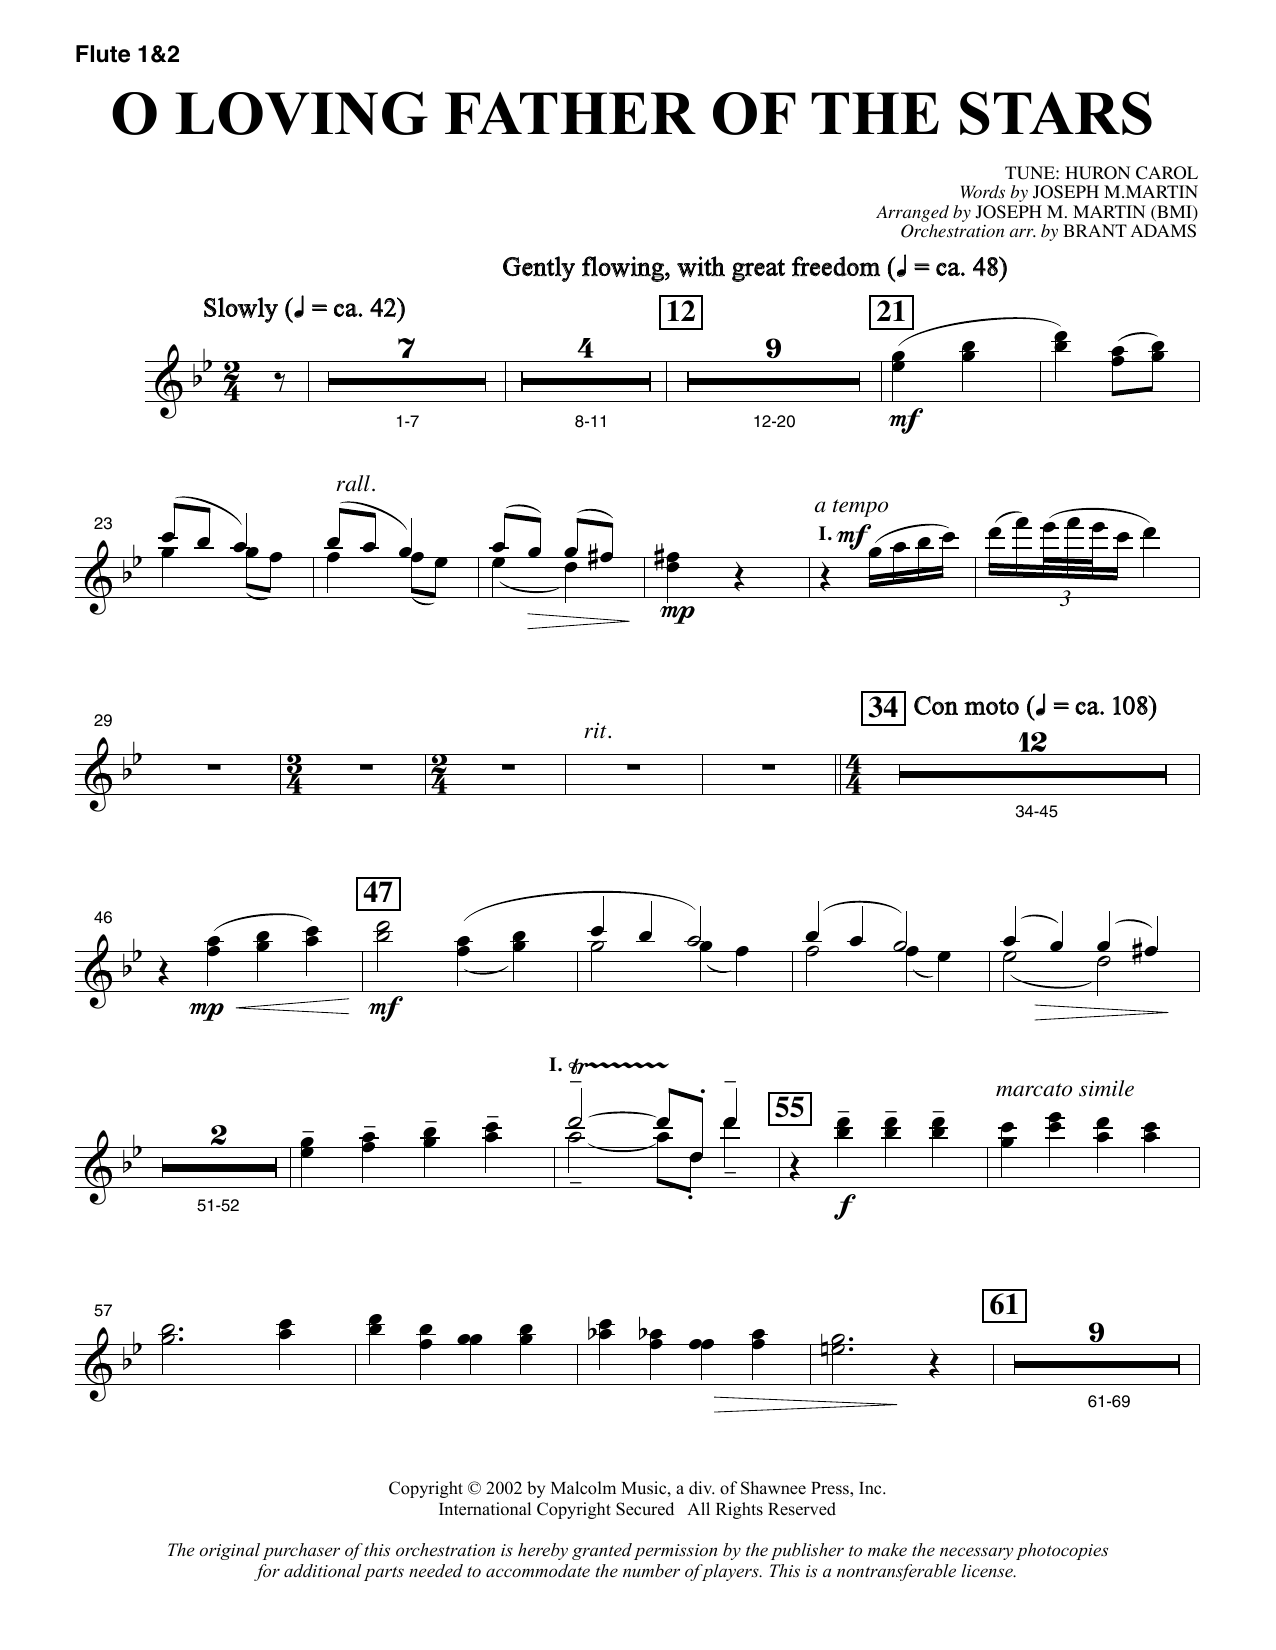 Joseph M. Martin O Loving Father Of The Stars (from Morning Star) - Flute 1 & 2 sheet music notes and chords. Download Printable PDF.